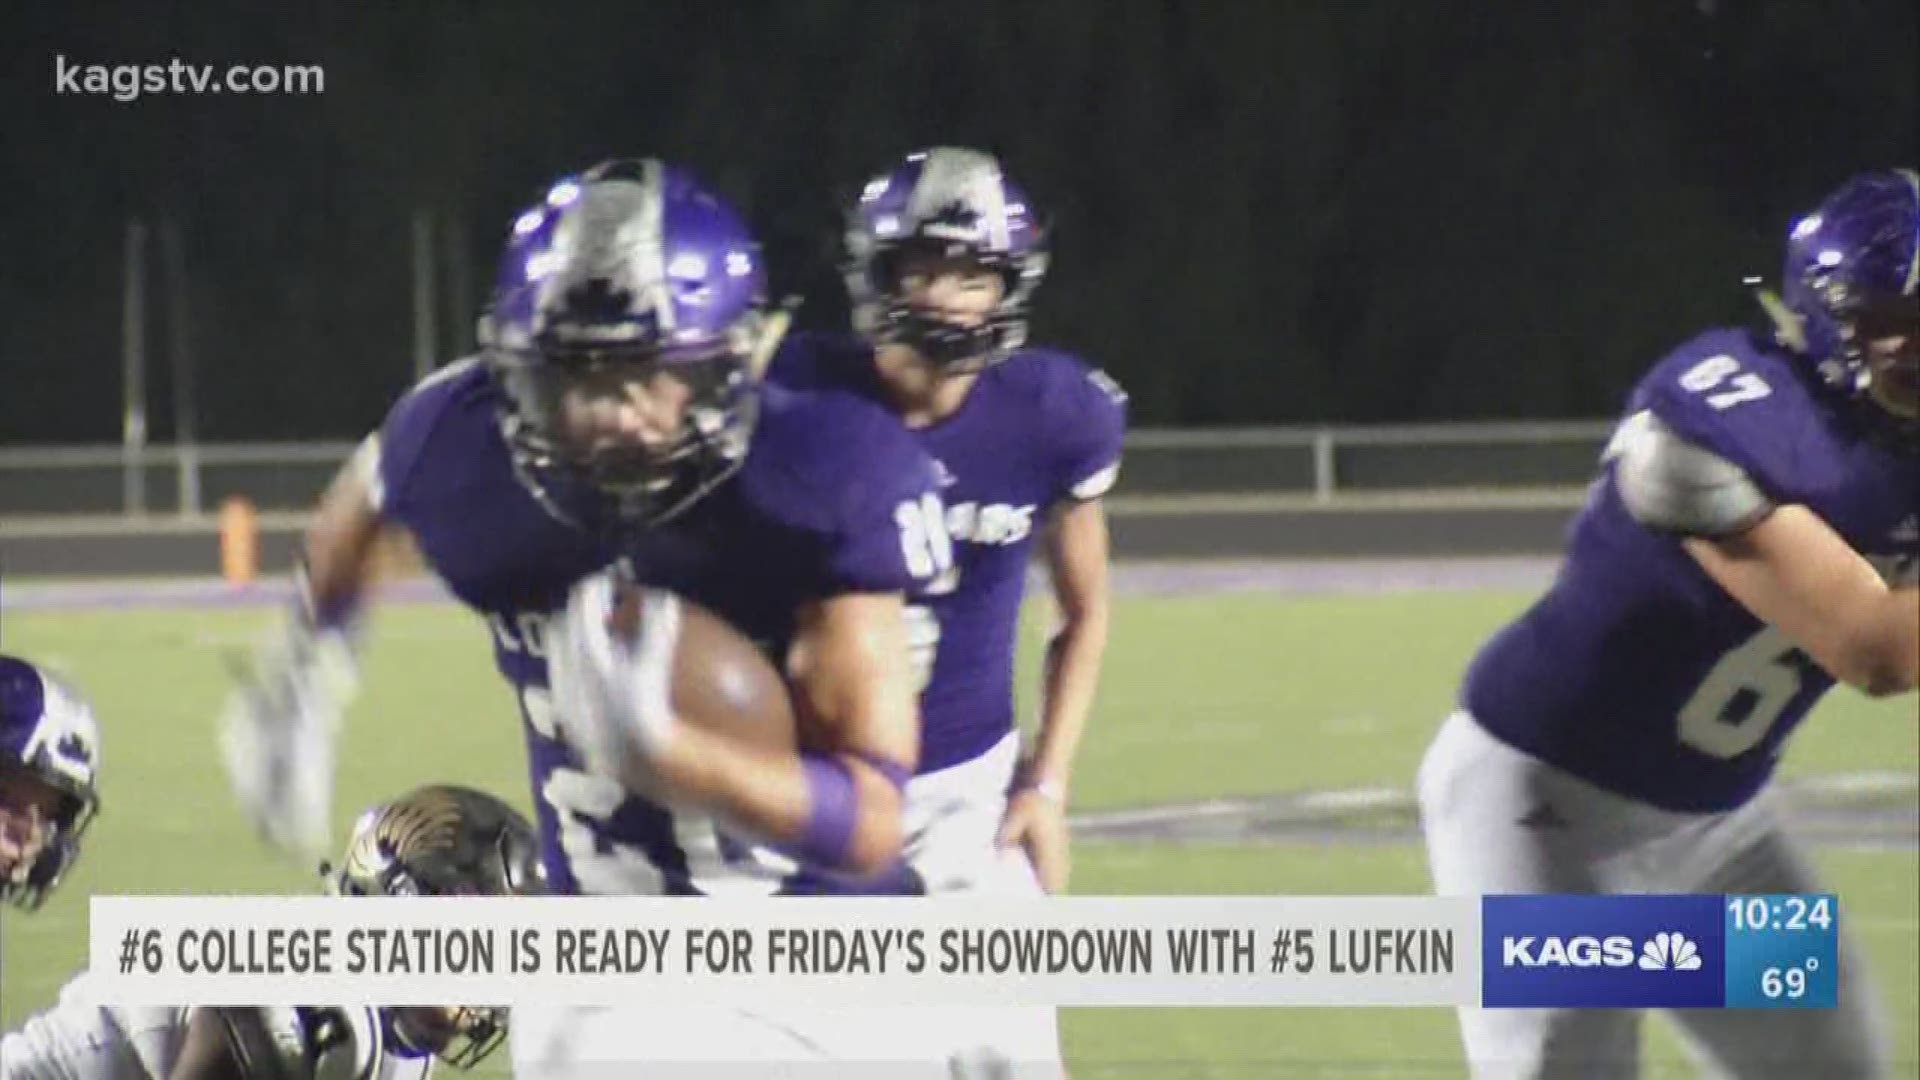 One of the biggest high school football games in the entire state will take place in the Brazos Valley on Friday night as undefeated College Station hosts Lufkin in a top 10 showdown.